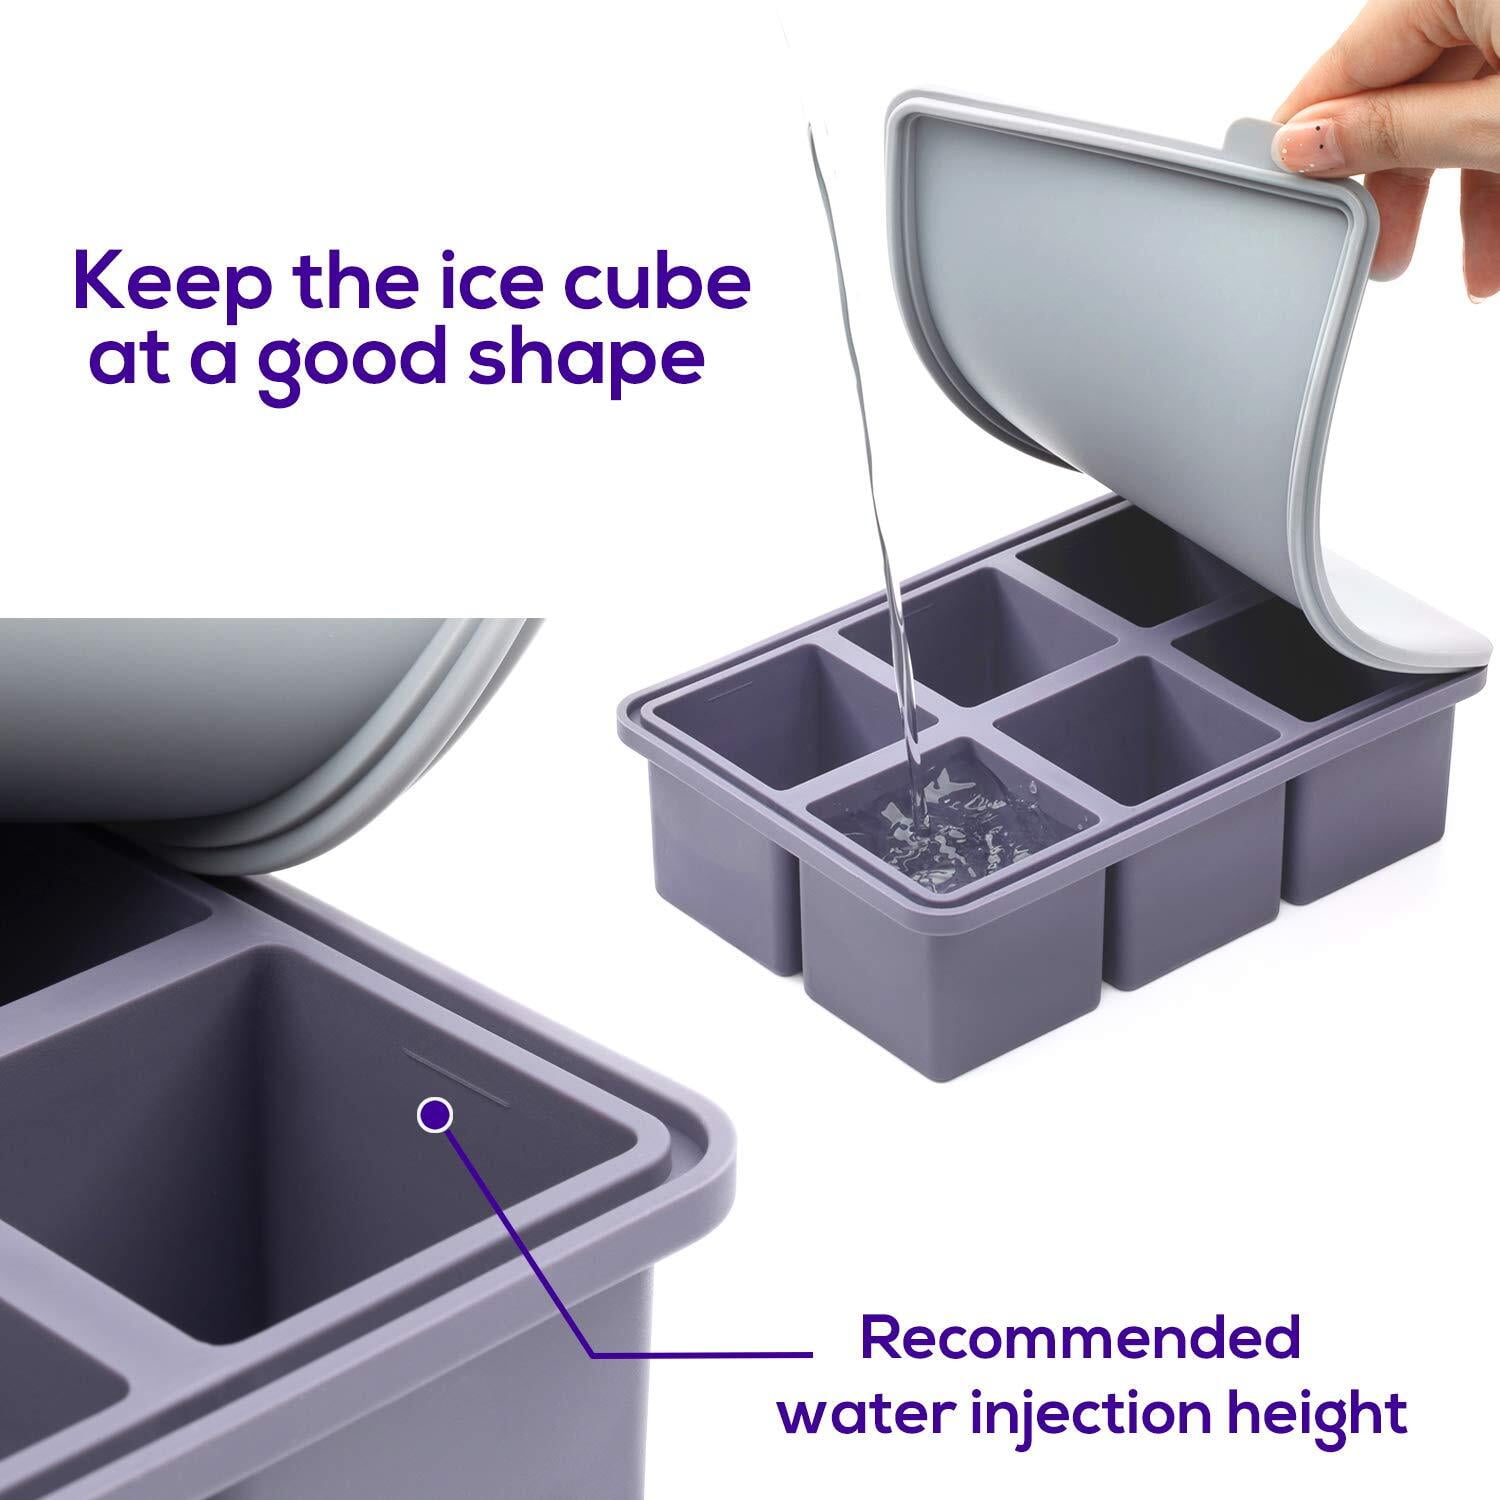 Large Cube Silicone Ice Tray, 2 Pack by Kitch, Giant 2 Inch Ice Cubes Keep  Your Drink Cooled for Hours - Cobalt Blue